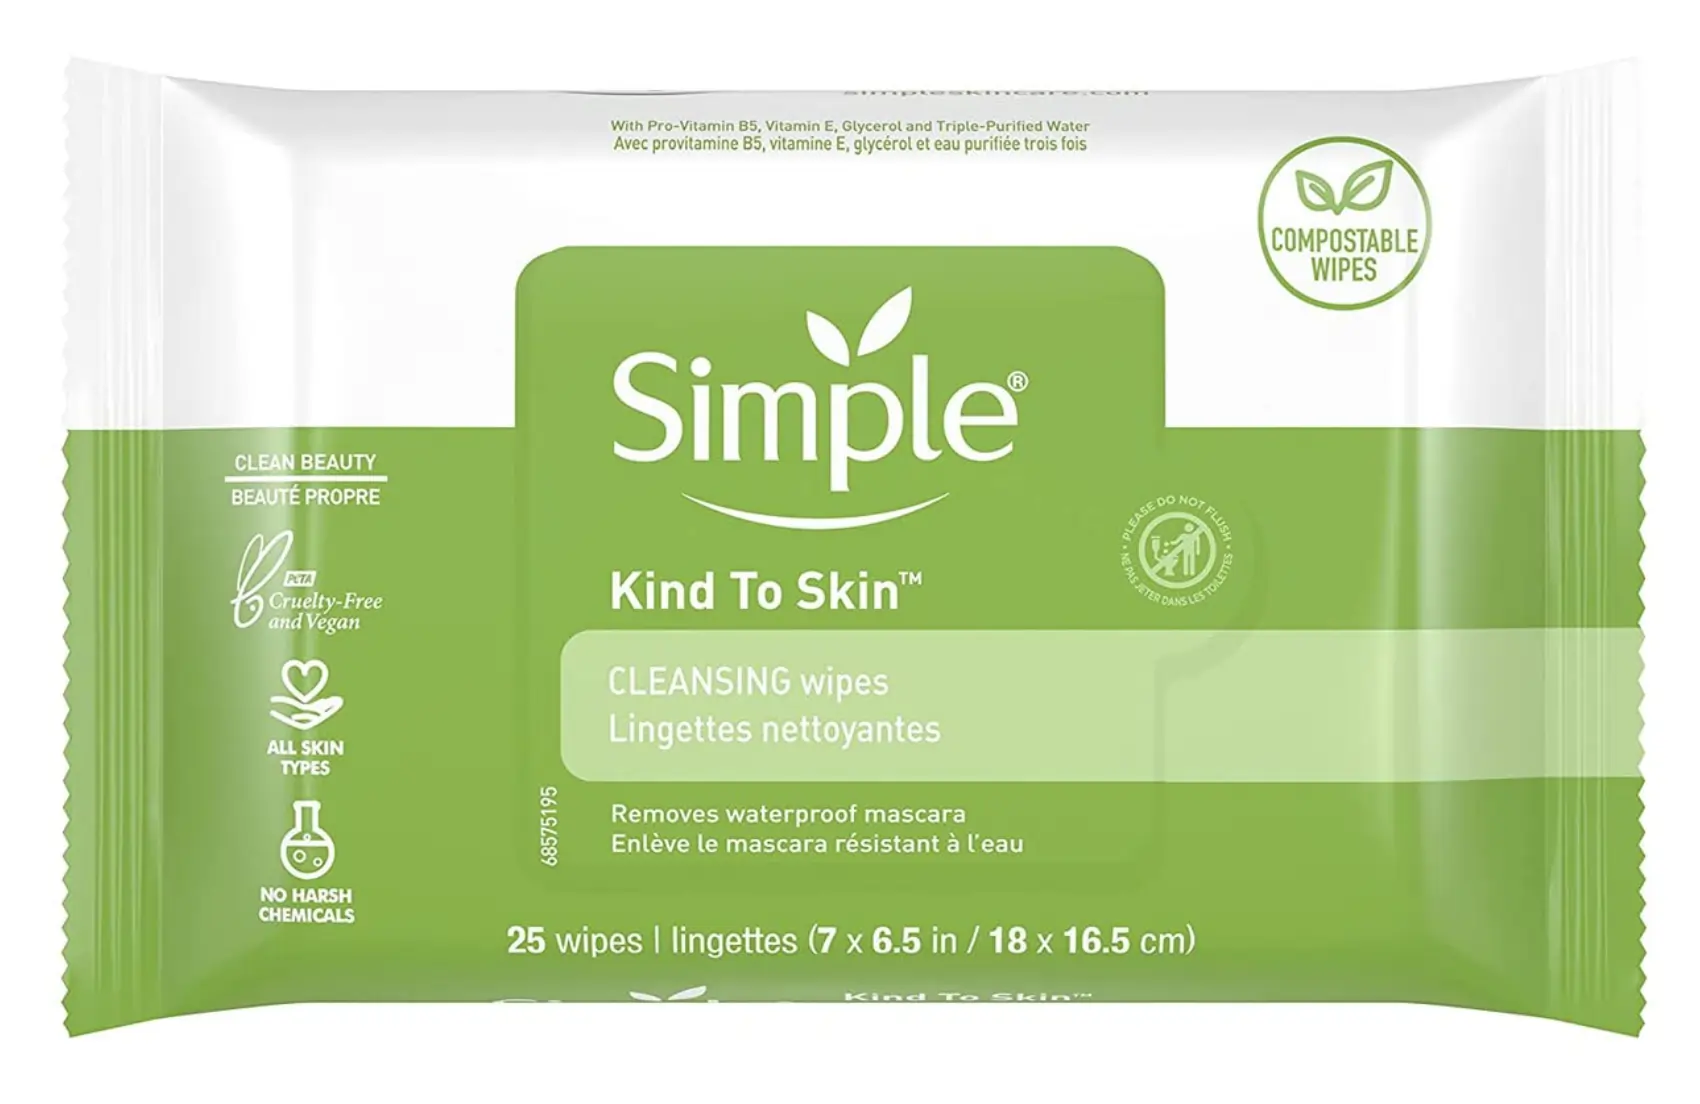 A close second in the Bioderma vs Simple makeup wipes comparison, the Simple Cleansing Facial Wipes.